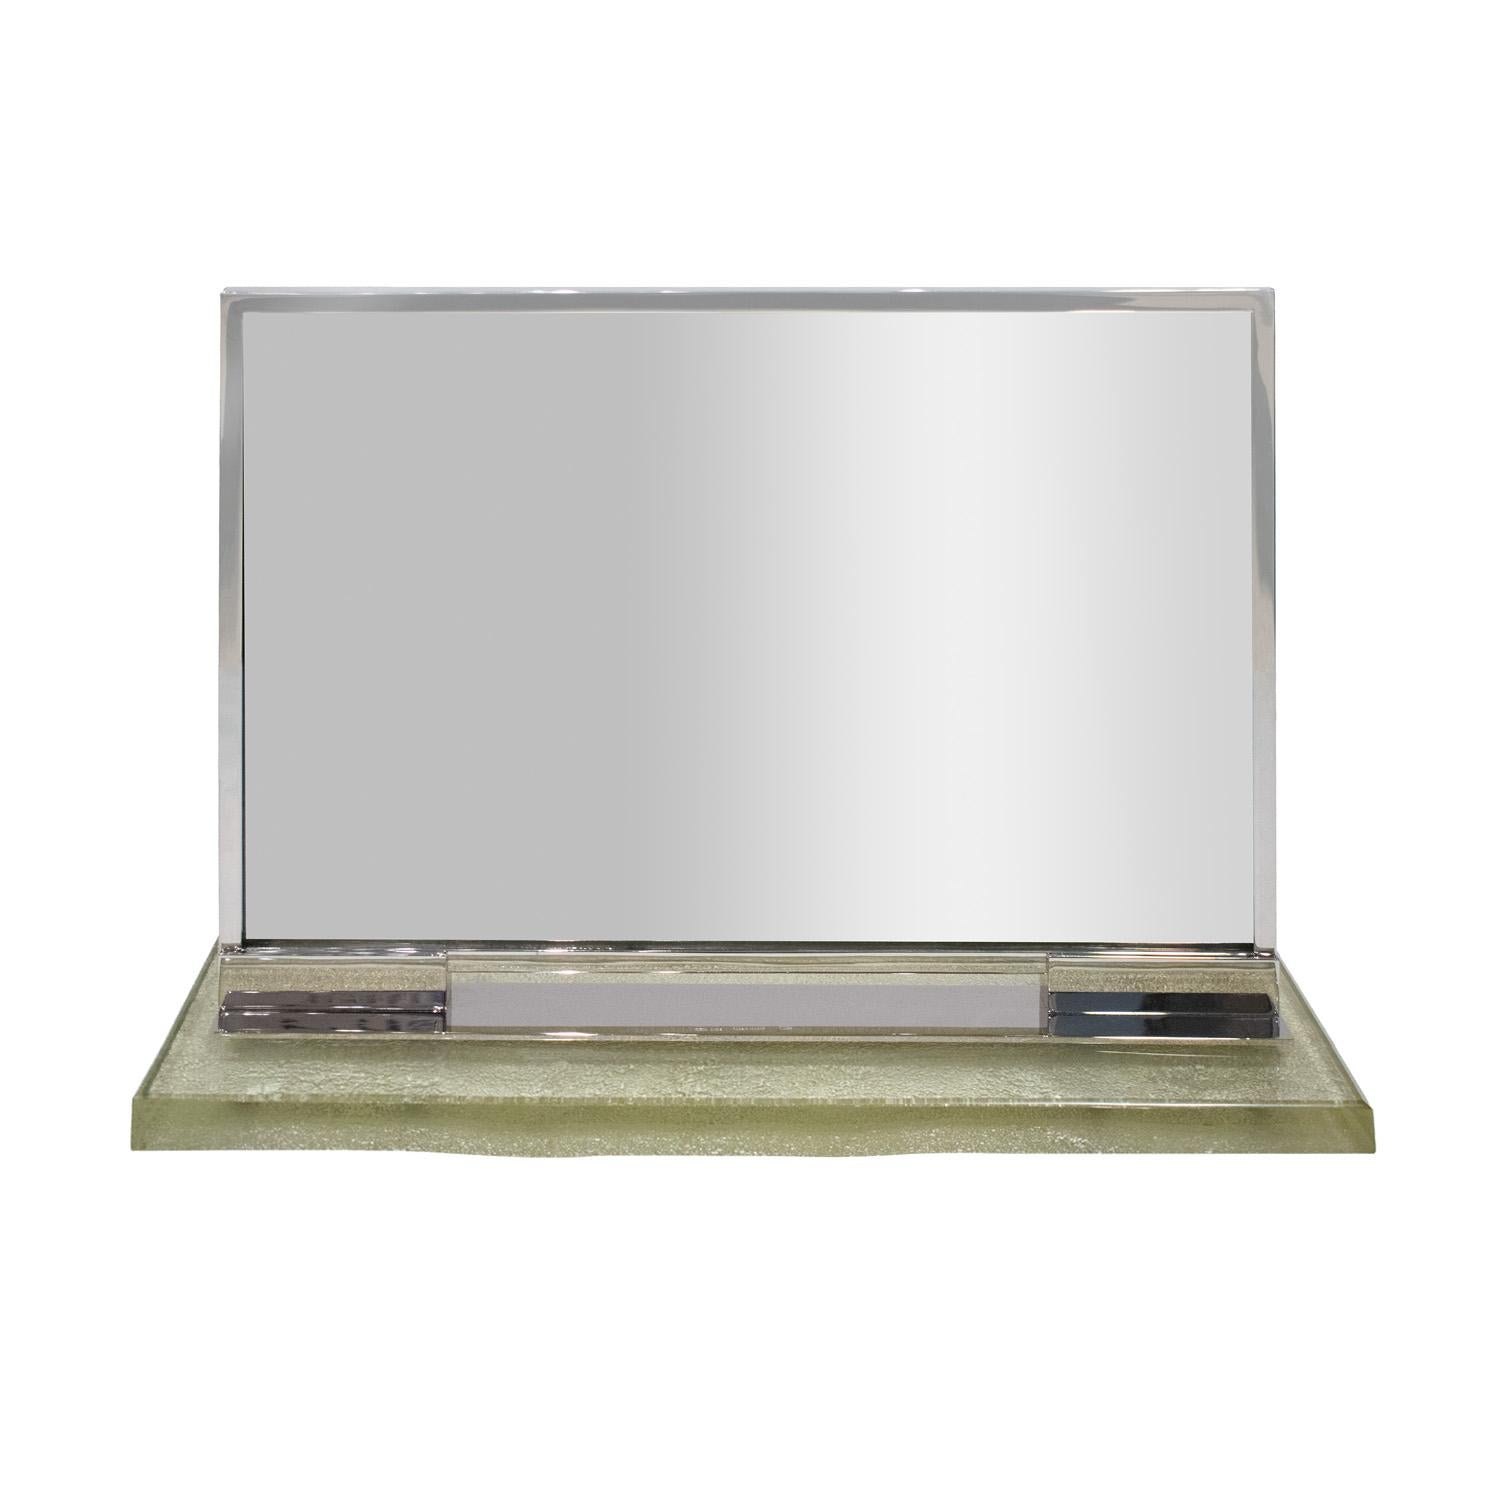 Rare and important vanity mirror in silverplate with thick glass base by Maison Desny Paris (1927-1933) ca. 1930 (Signed “DESNY PARIS, MADE IN FRANCE, DEPOSE”).  The bottom of the glass base is sand-blasted.  The back of the mirror is a beautiful